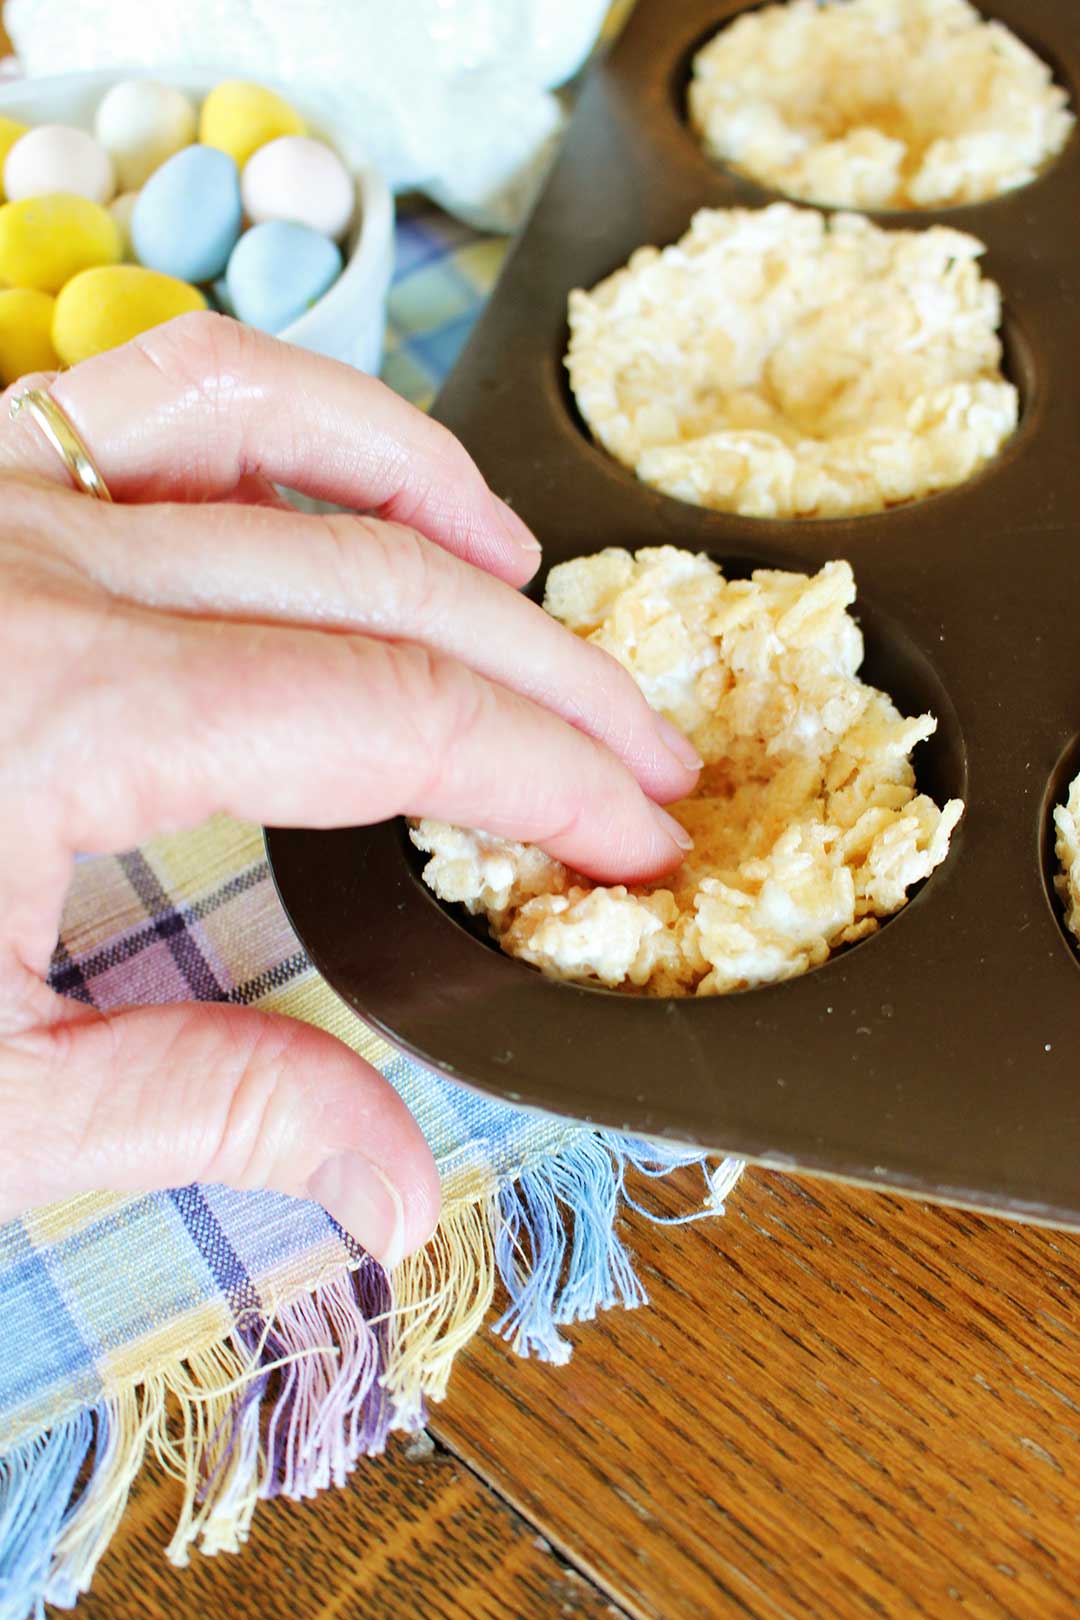 Fingers pressing rice krispie treats into the shape of a nest in a muffin cup.